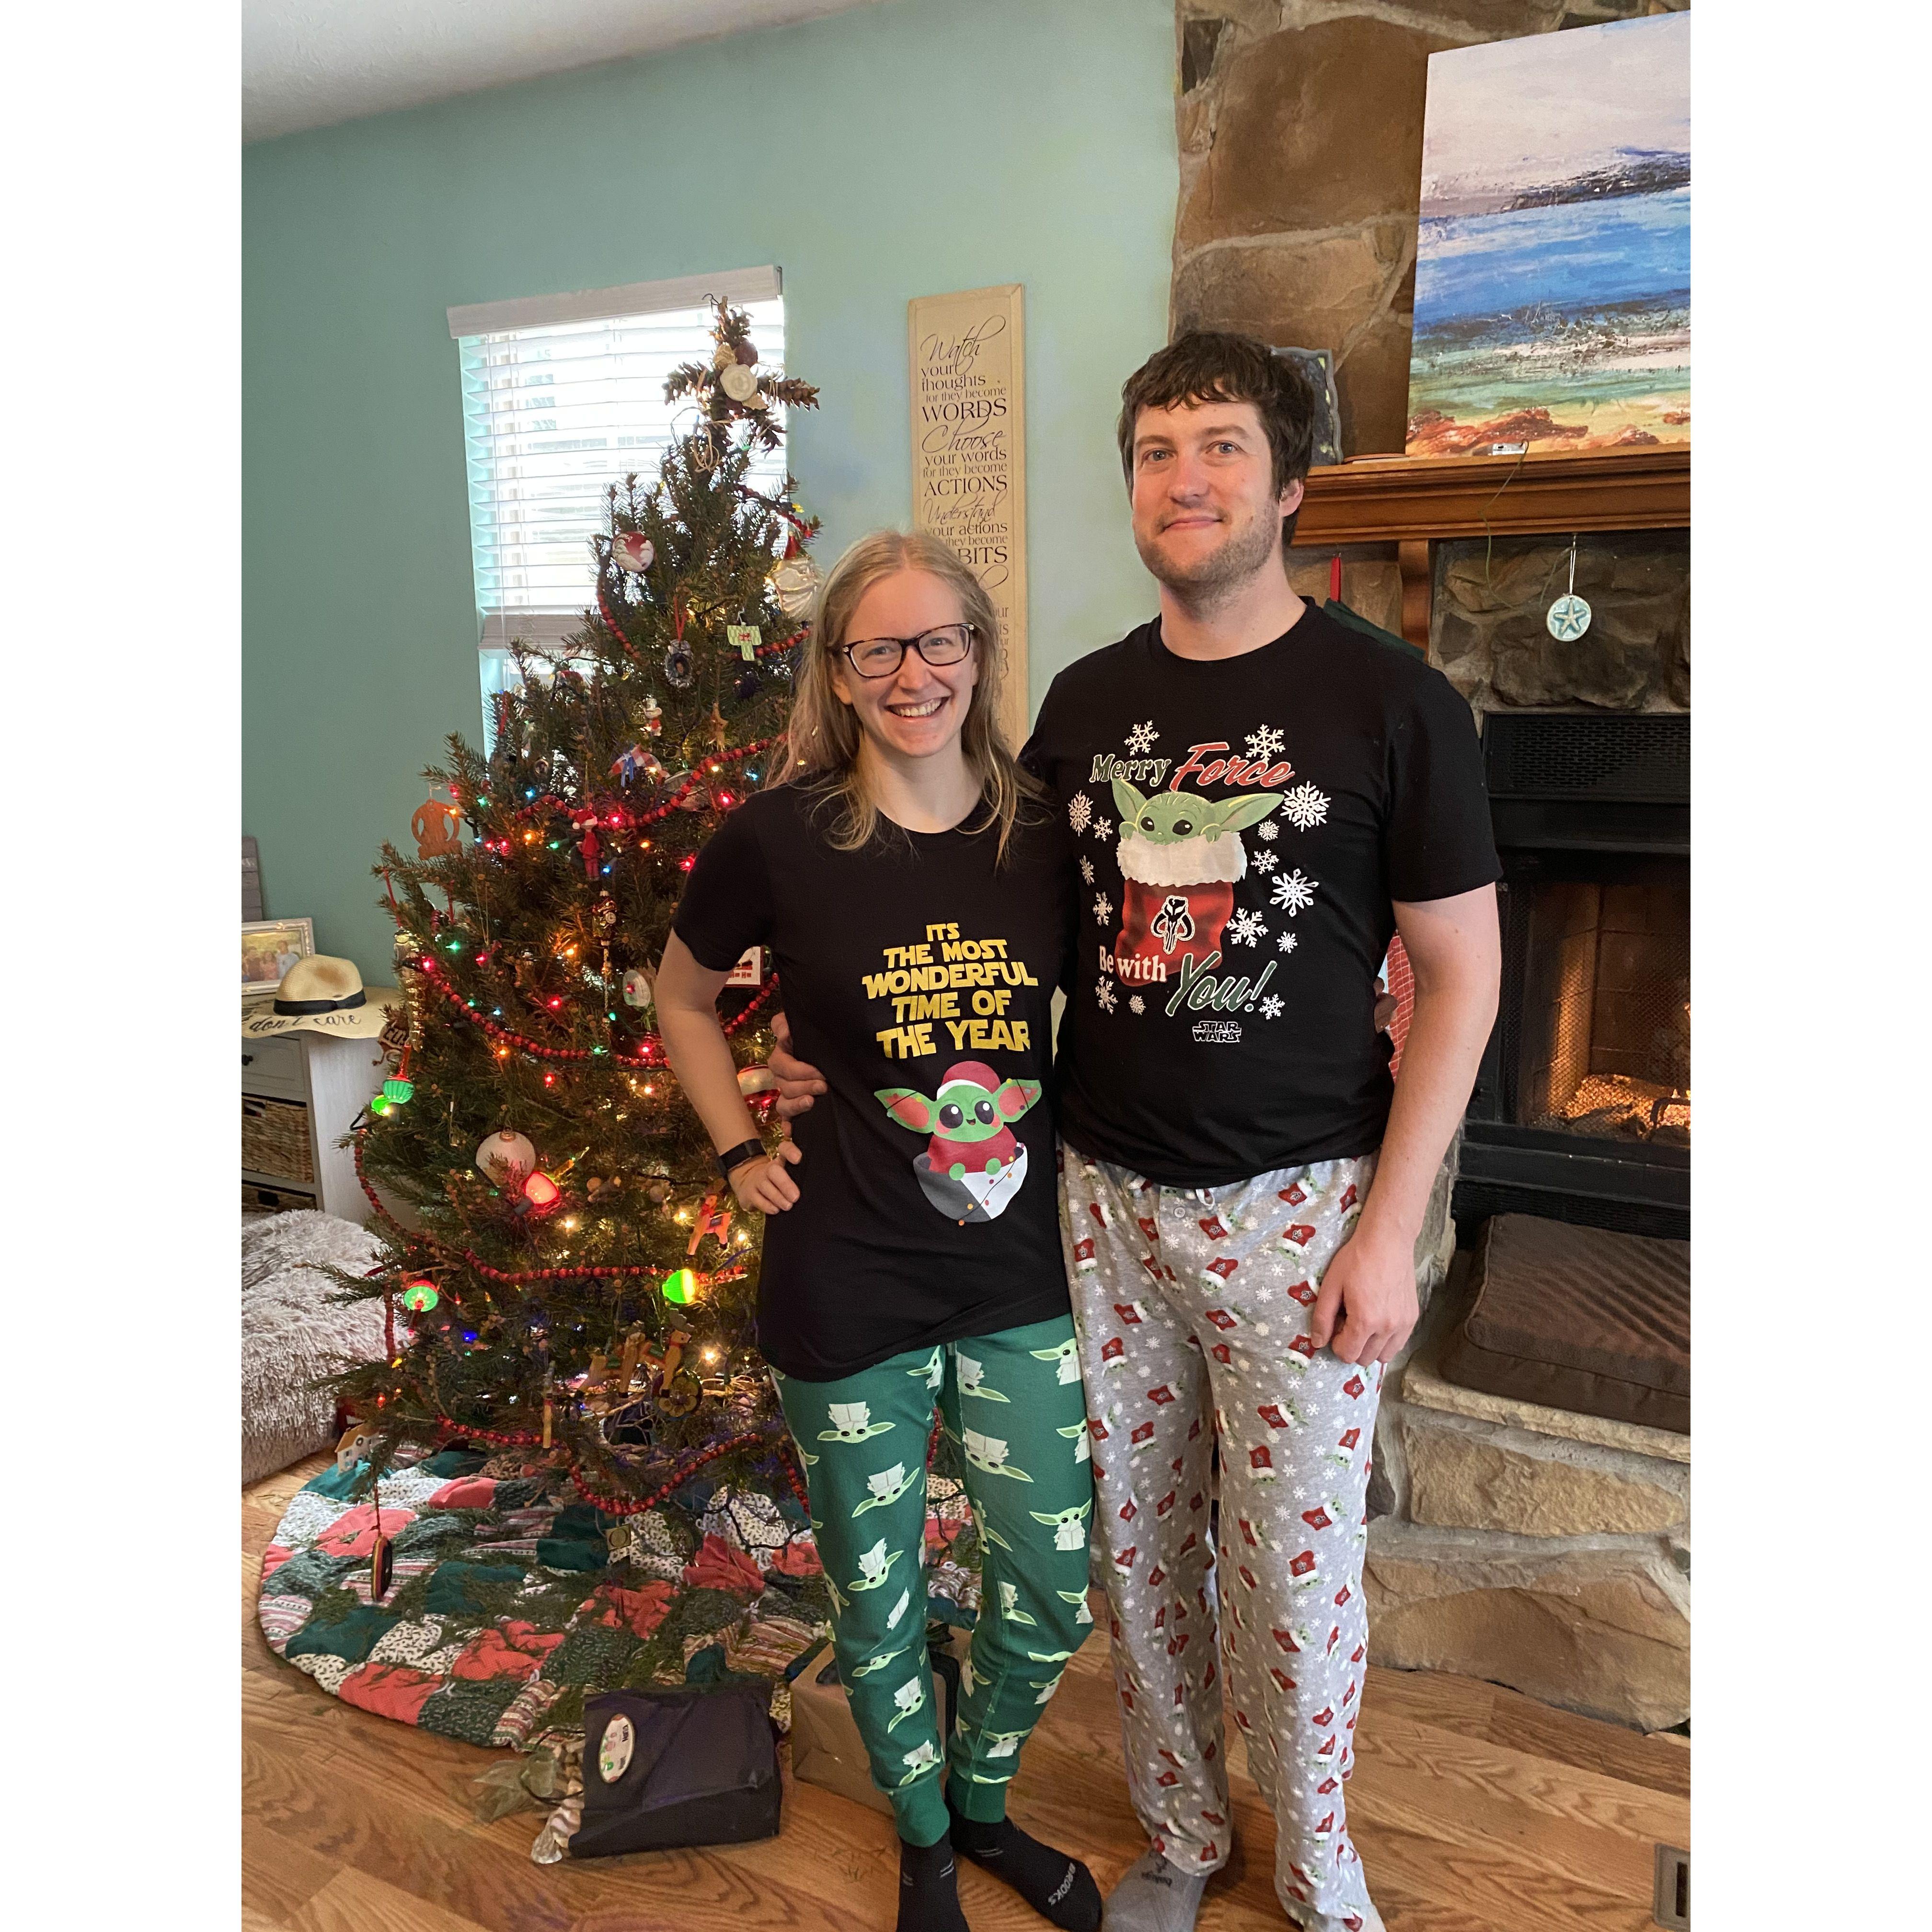 JP reluctantly agreed to wear Christmas-themed pajamas